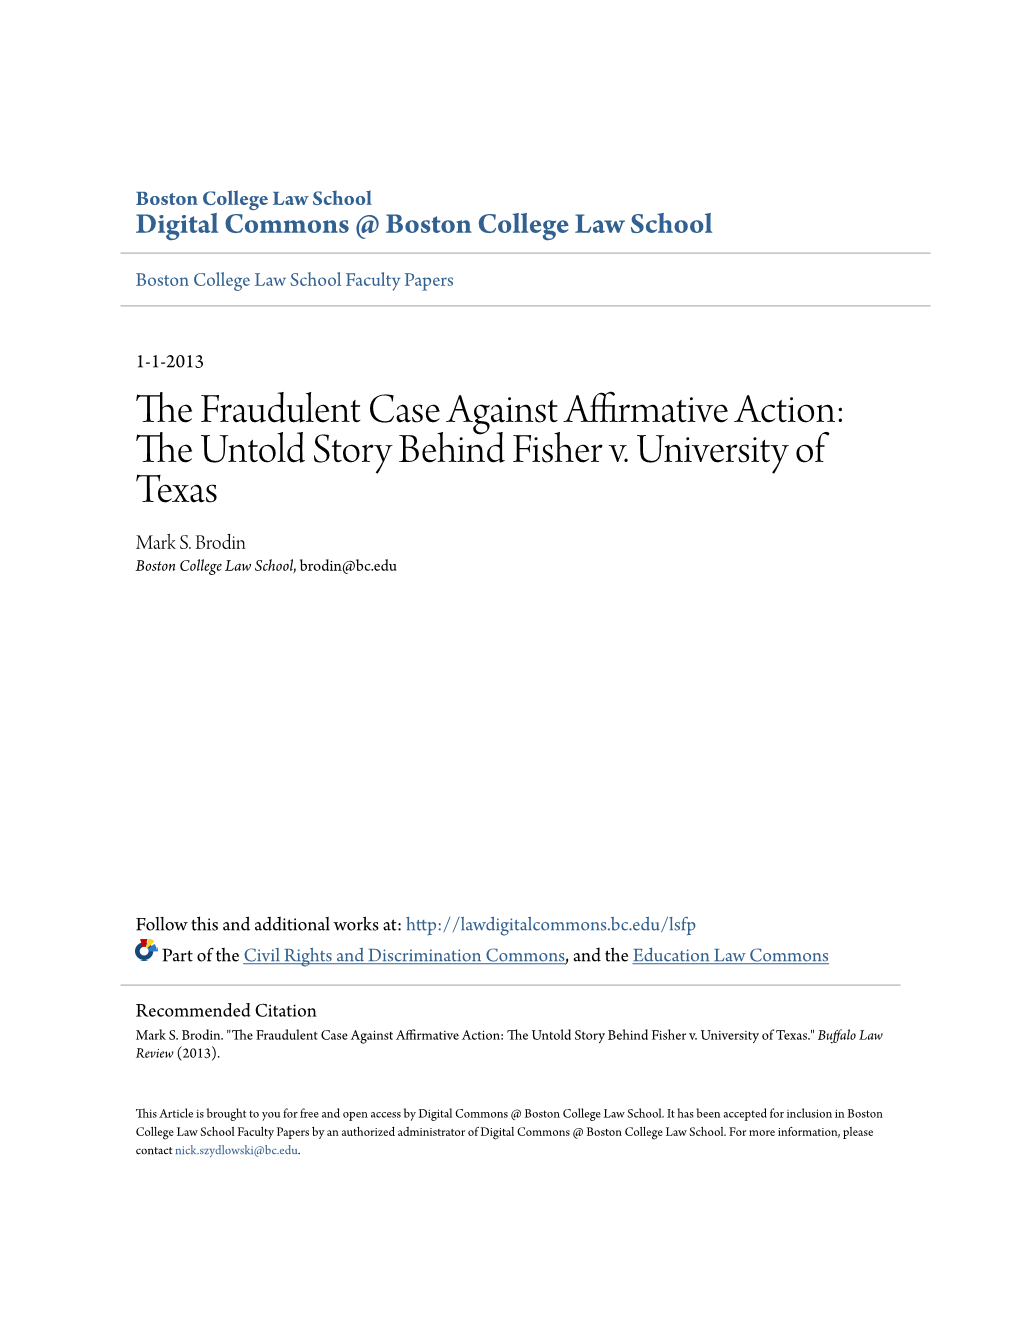 The Fraudulent Case Against Affirmative Action: the Untold Story Behind Fisher V. University of Texas